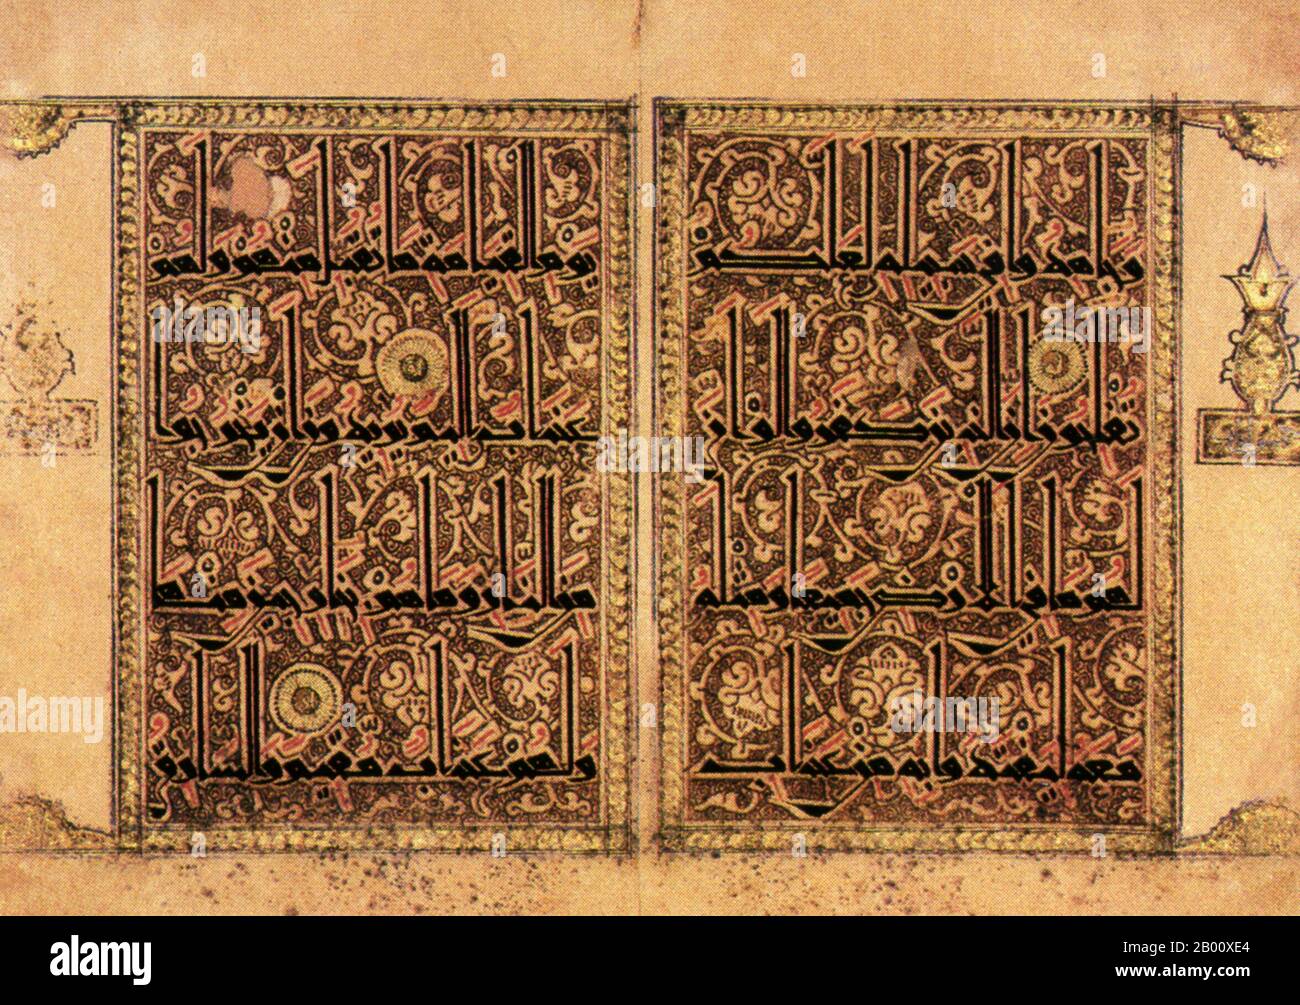 Arabia/Middle East: Two pages from an 11th-century copy of the Qur’an.  The Qur’an (literally “the recitation”) is the main religious text of Islam. Muslims believe the Qur’an to be the verbal divine guidance and moral direction for mankind. Muslims also consider the original Arabic verbal text to be the final revelation of God. Muslims believe that the Qur’an was revealed from God to Muhammad through the angel Gabriel from 610 to 632 CE, the year of the Prophet’s death. Muhammad recited the Qur’an to his thousands of followers, who recited it until they had memorized it. Stock Photo